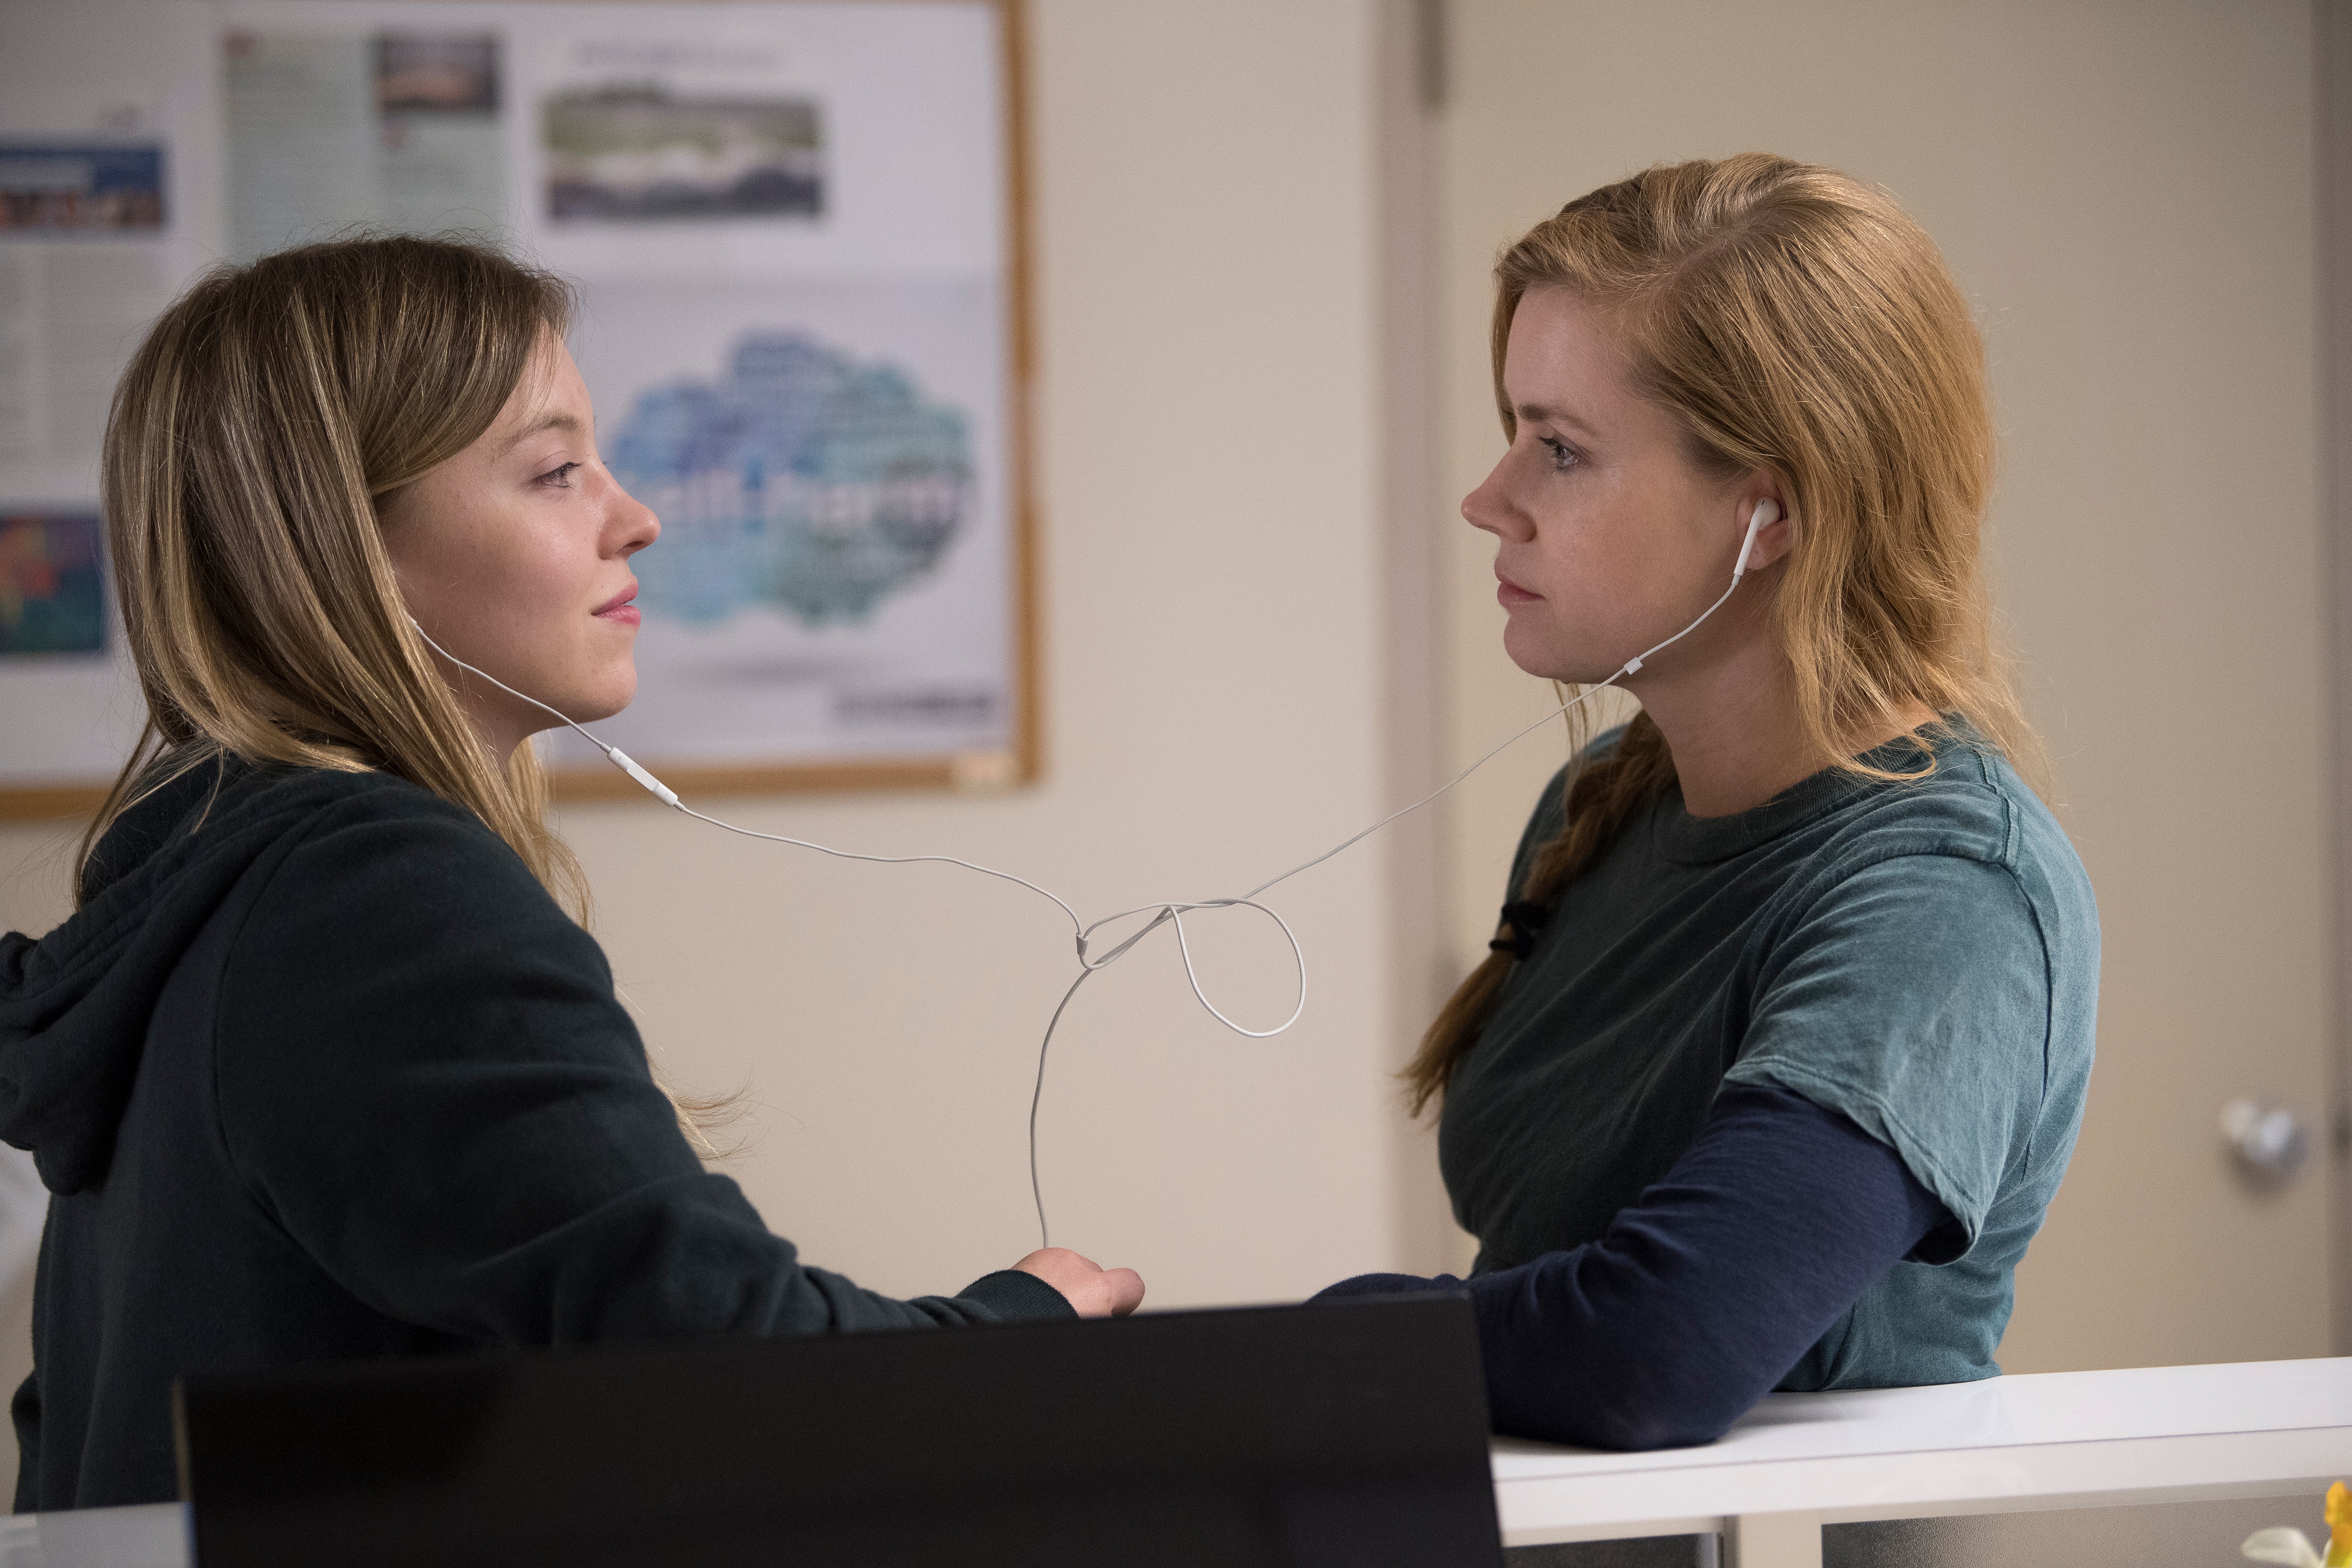 In ‘Sharp Objects’, Sweeney and Amy Adams played roommates at a facility for people receiving treatment for self-harm